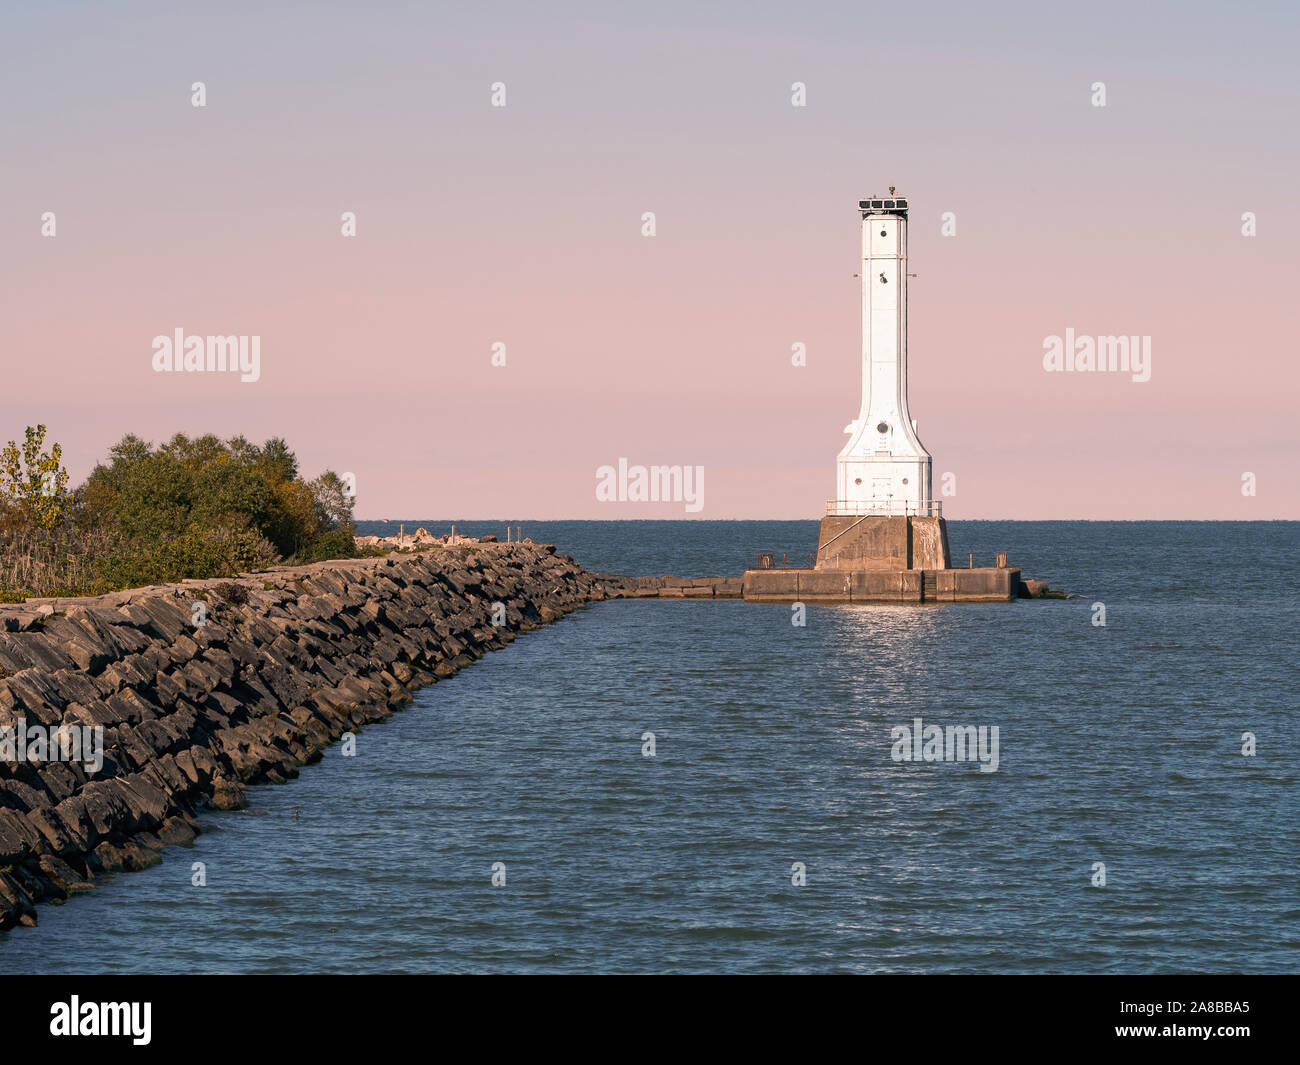 Huron Harbor Lighthouse on Lake Erie, pink sky at night, sailor's delight, fall 2018 at twilight. Art deco style steel light house built in 1939 Ohio Stock Photo